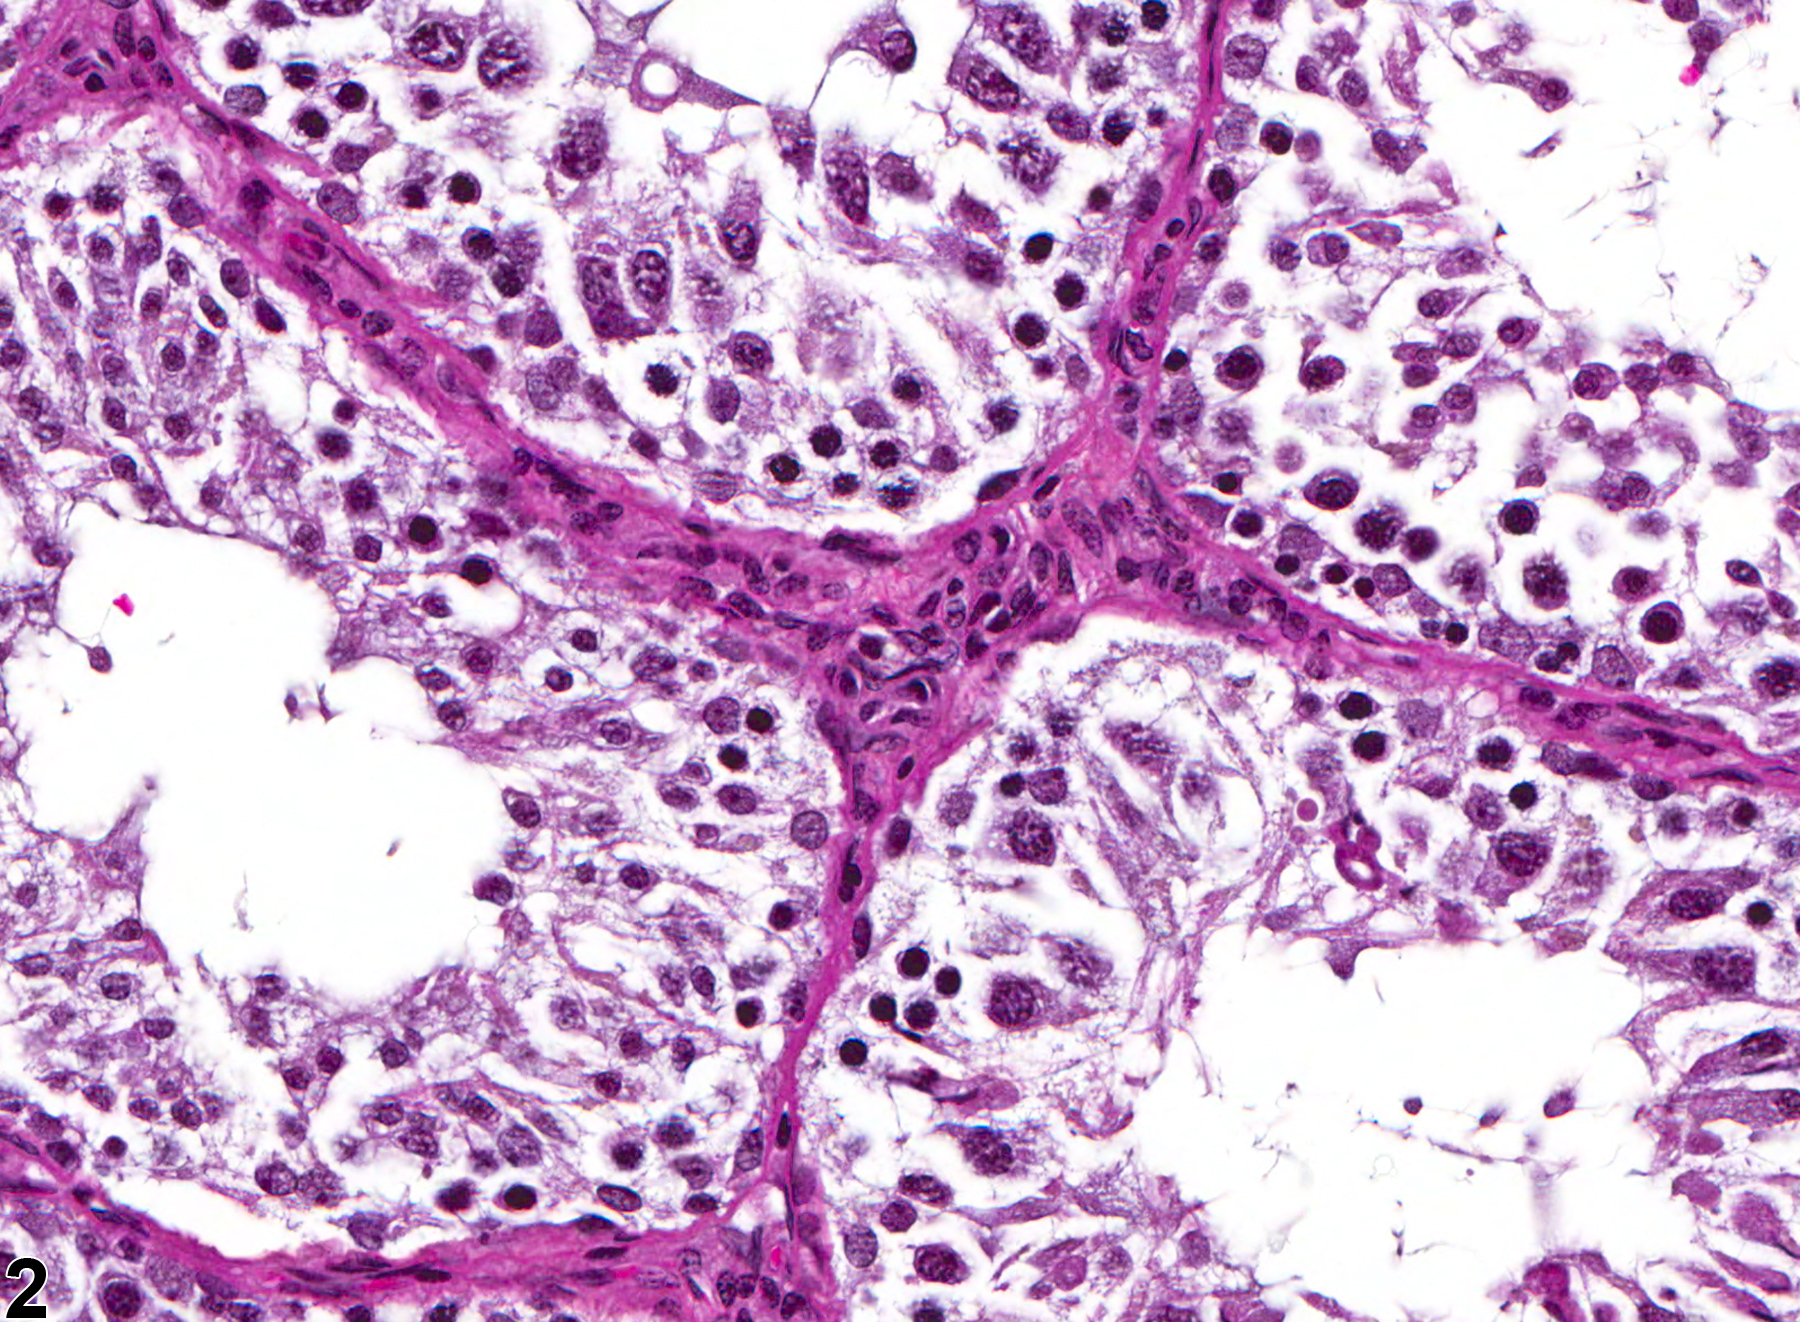 Image of germinal epithelium degeneration in the testis from a male F344/N rat in a chronic study